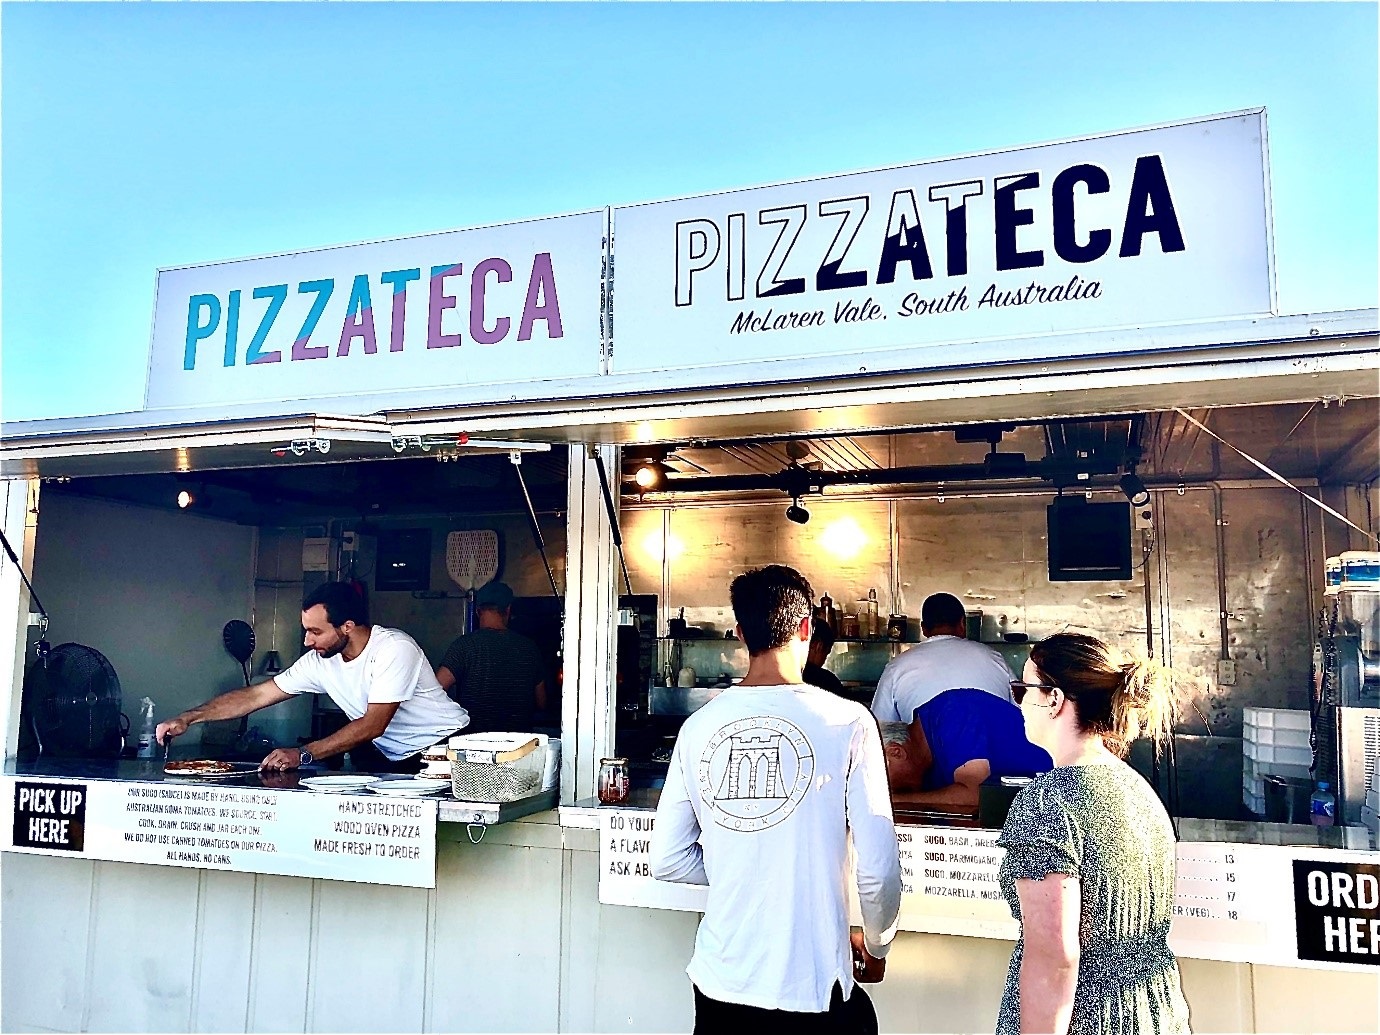 The front of the Pizzateca pop up at Aldinga Beach, with customers waiting to order and a chef preparing a pizza.